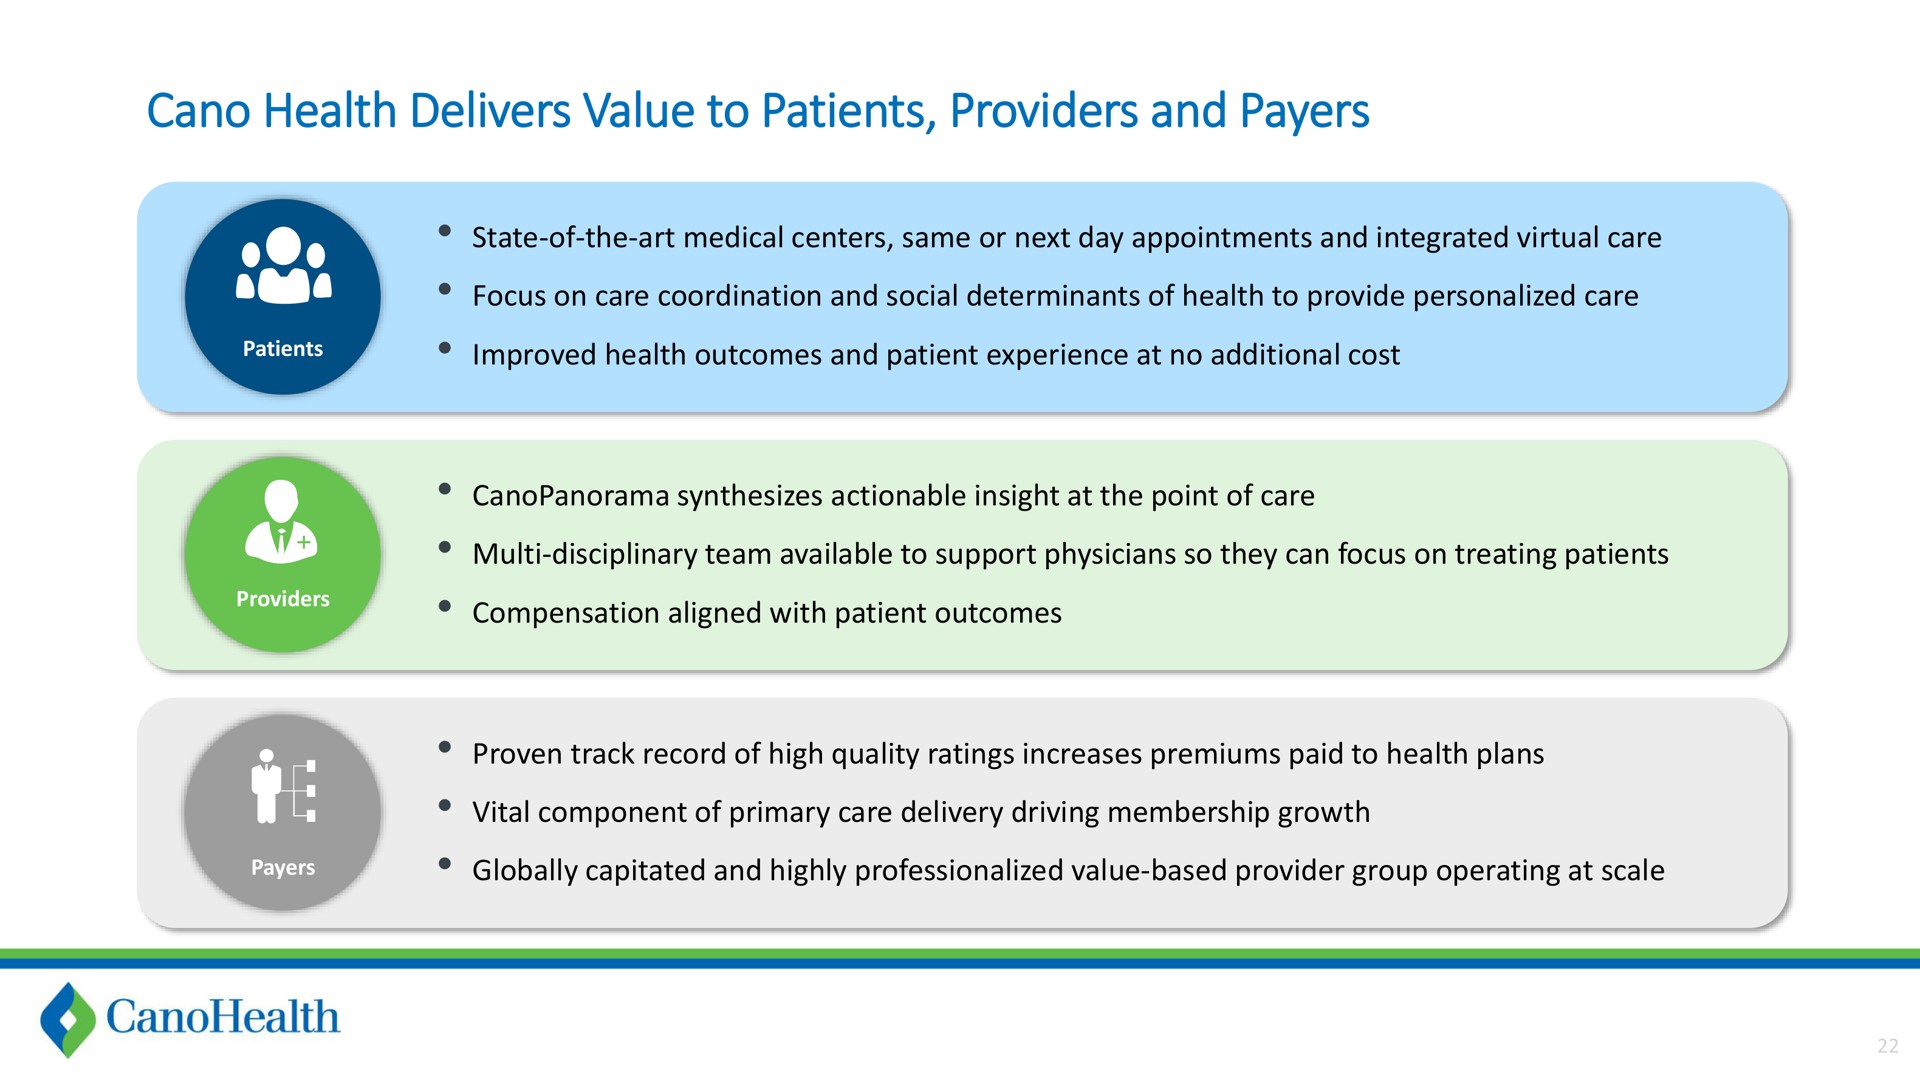 health delivers value to patients providers and payers | Cano Health